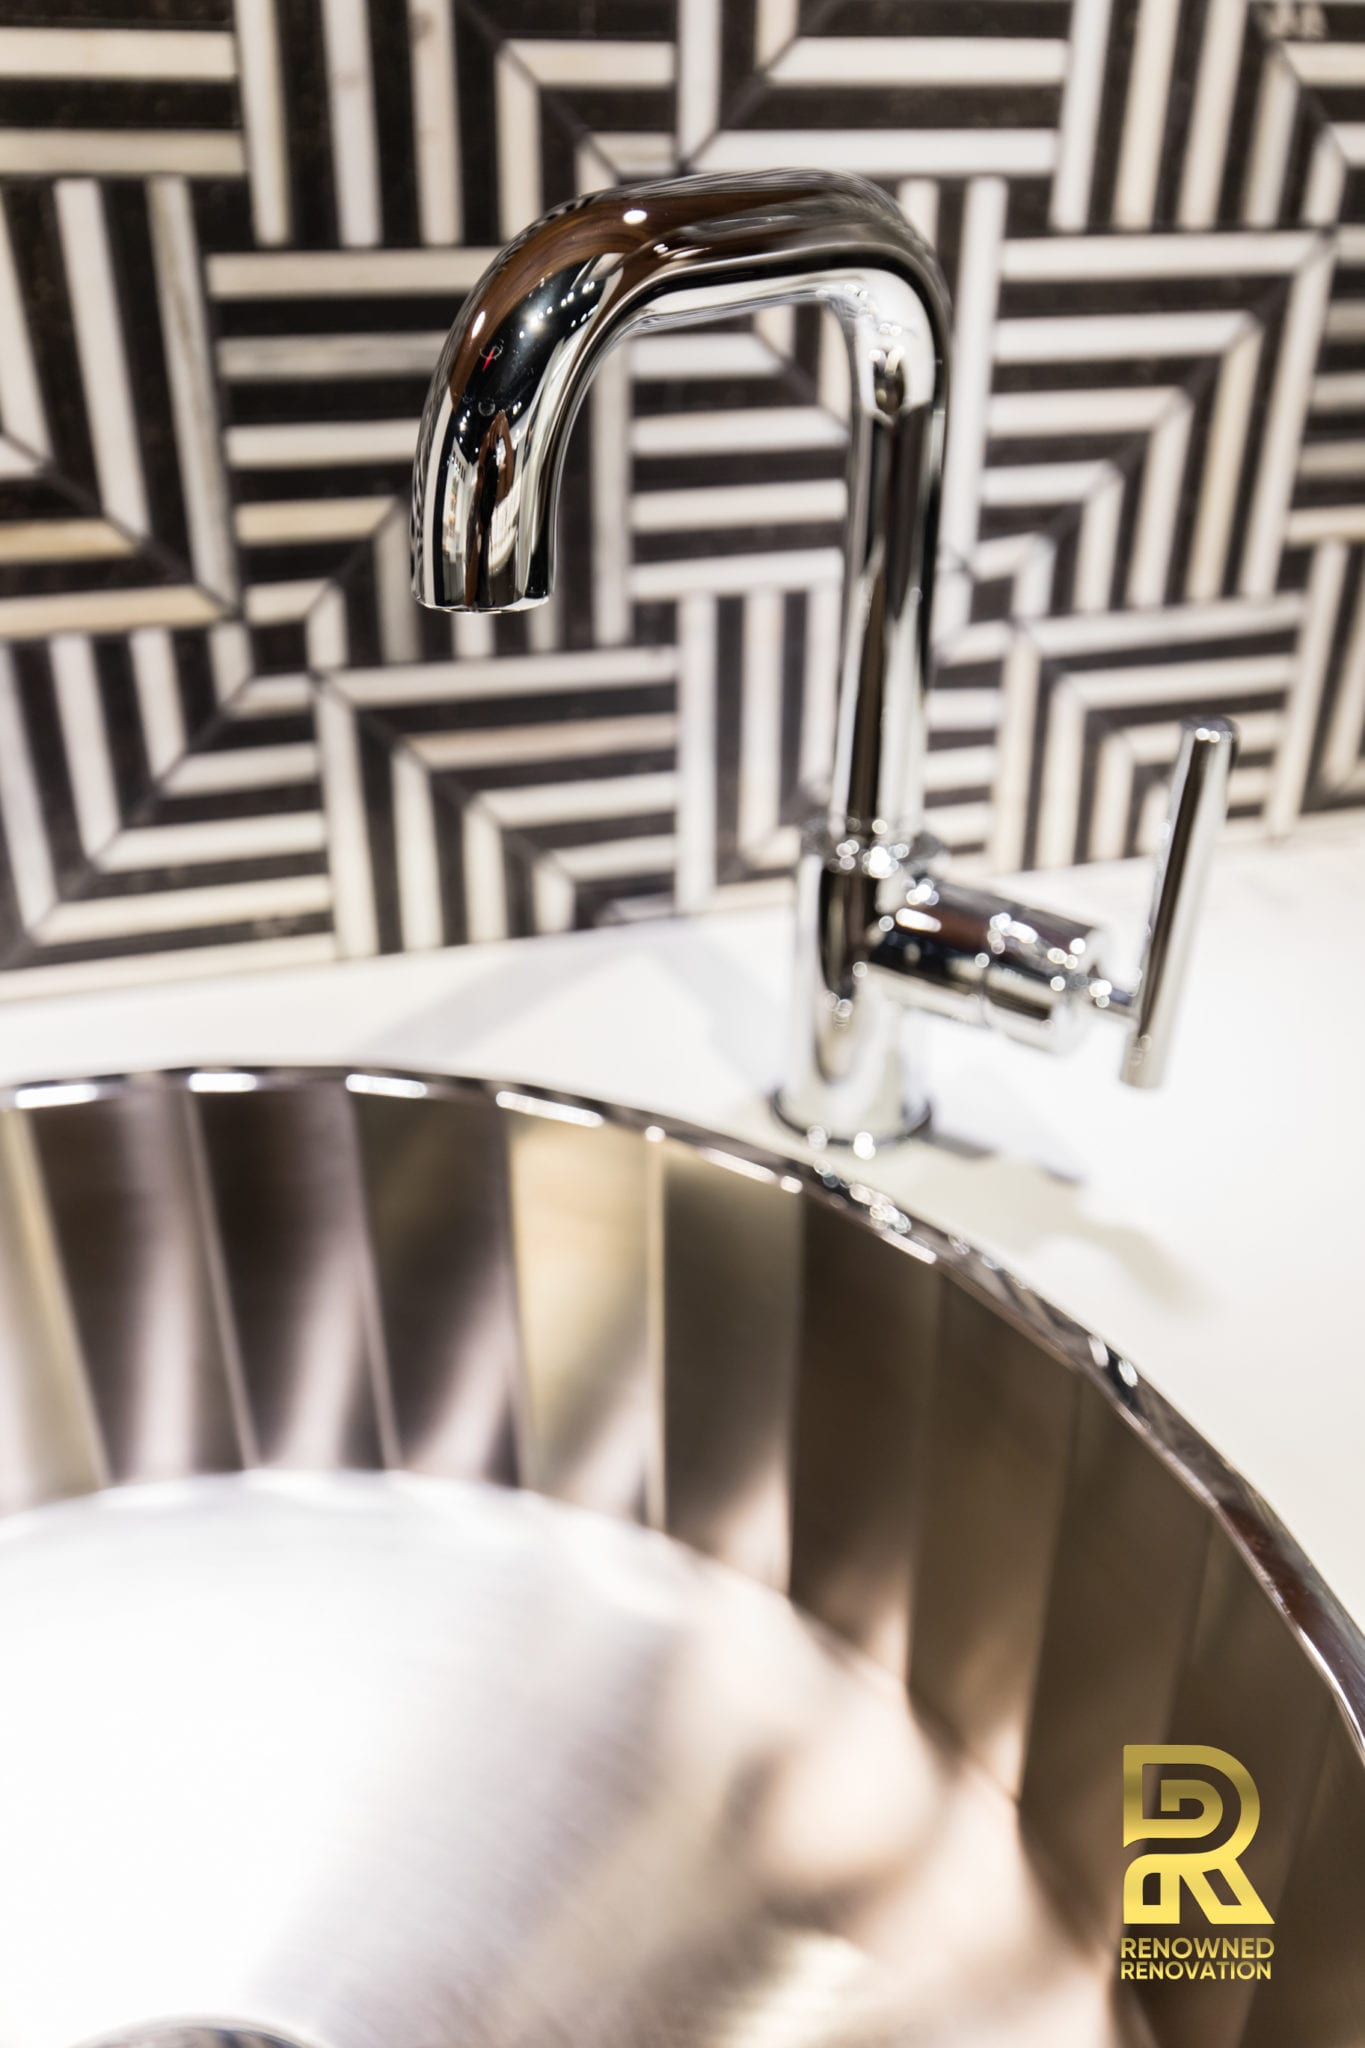 Kohler-Signature-Store-Dallas-StyleCraft-Cabinets-Designed-by-Renowned-Renovation21